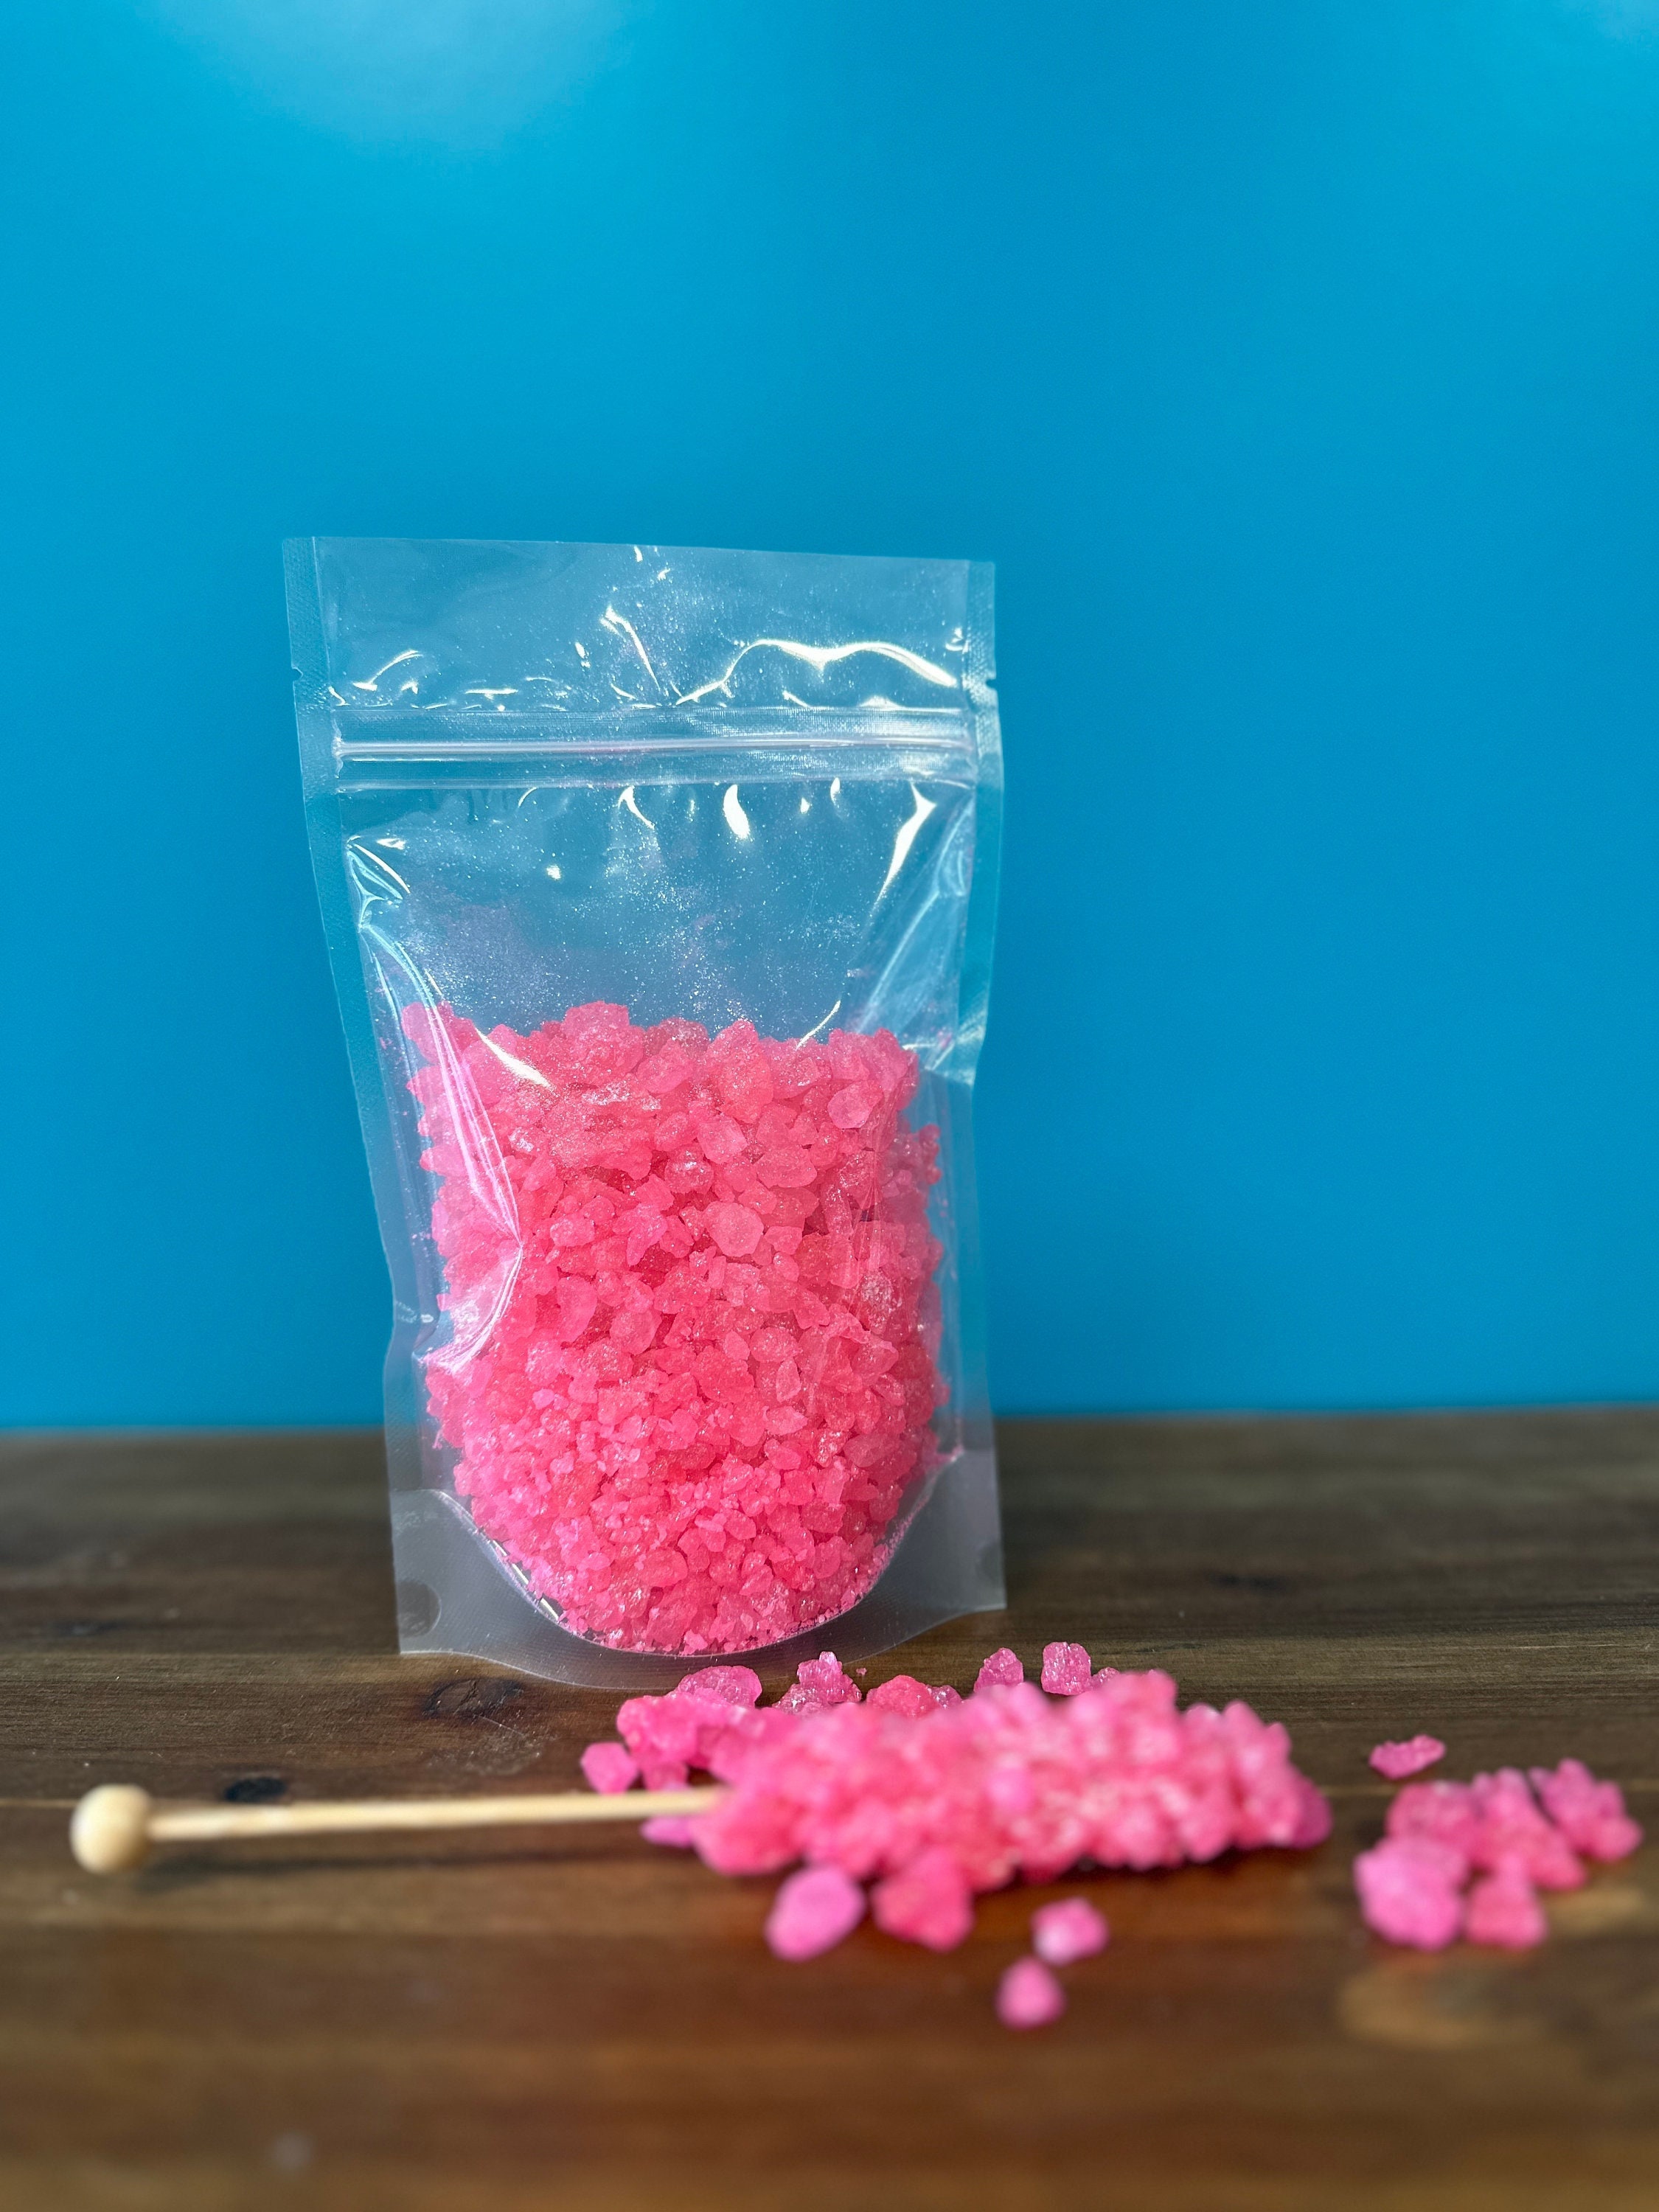 Pink Rock Candy Crystals Glittering Nuggets for Geode Cakes image picture